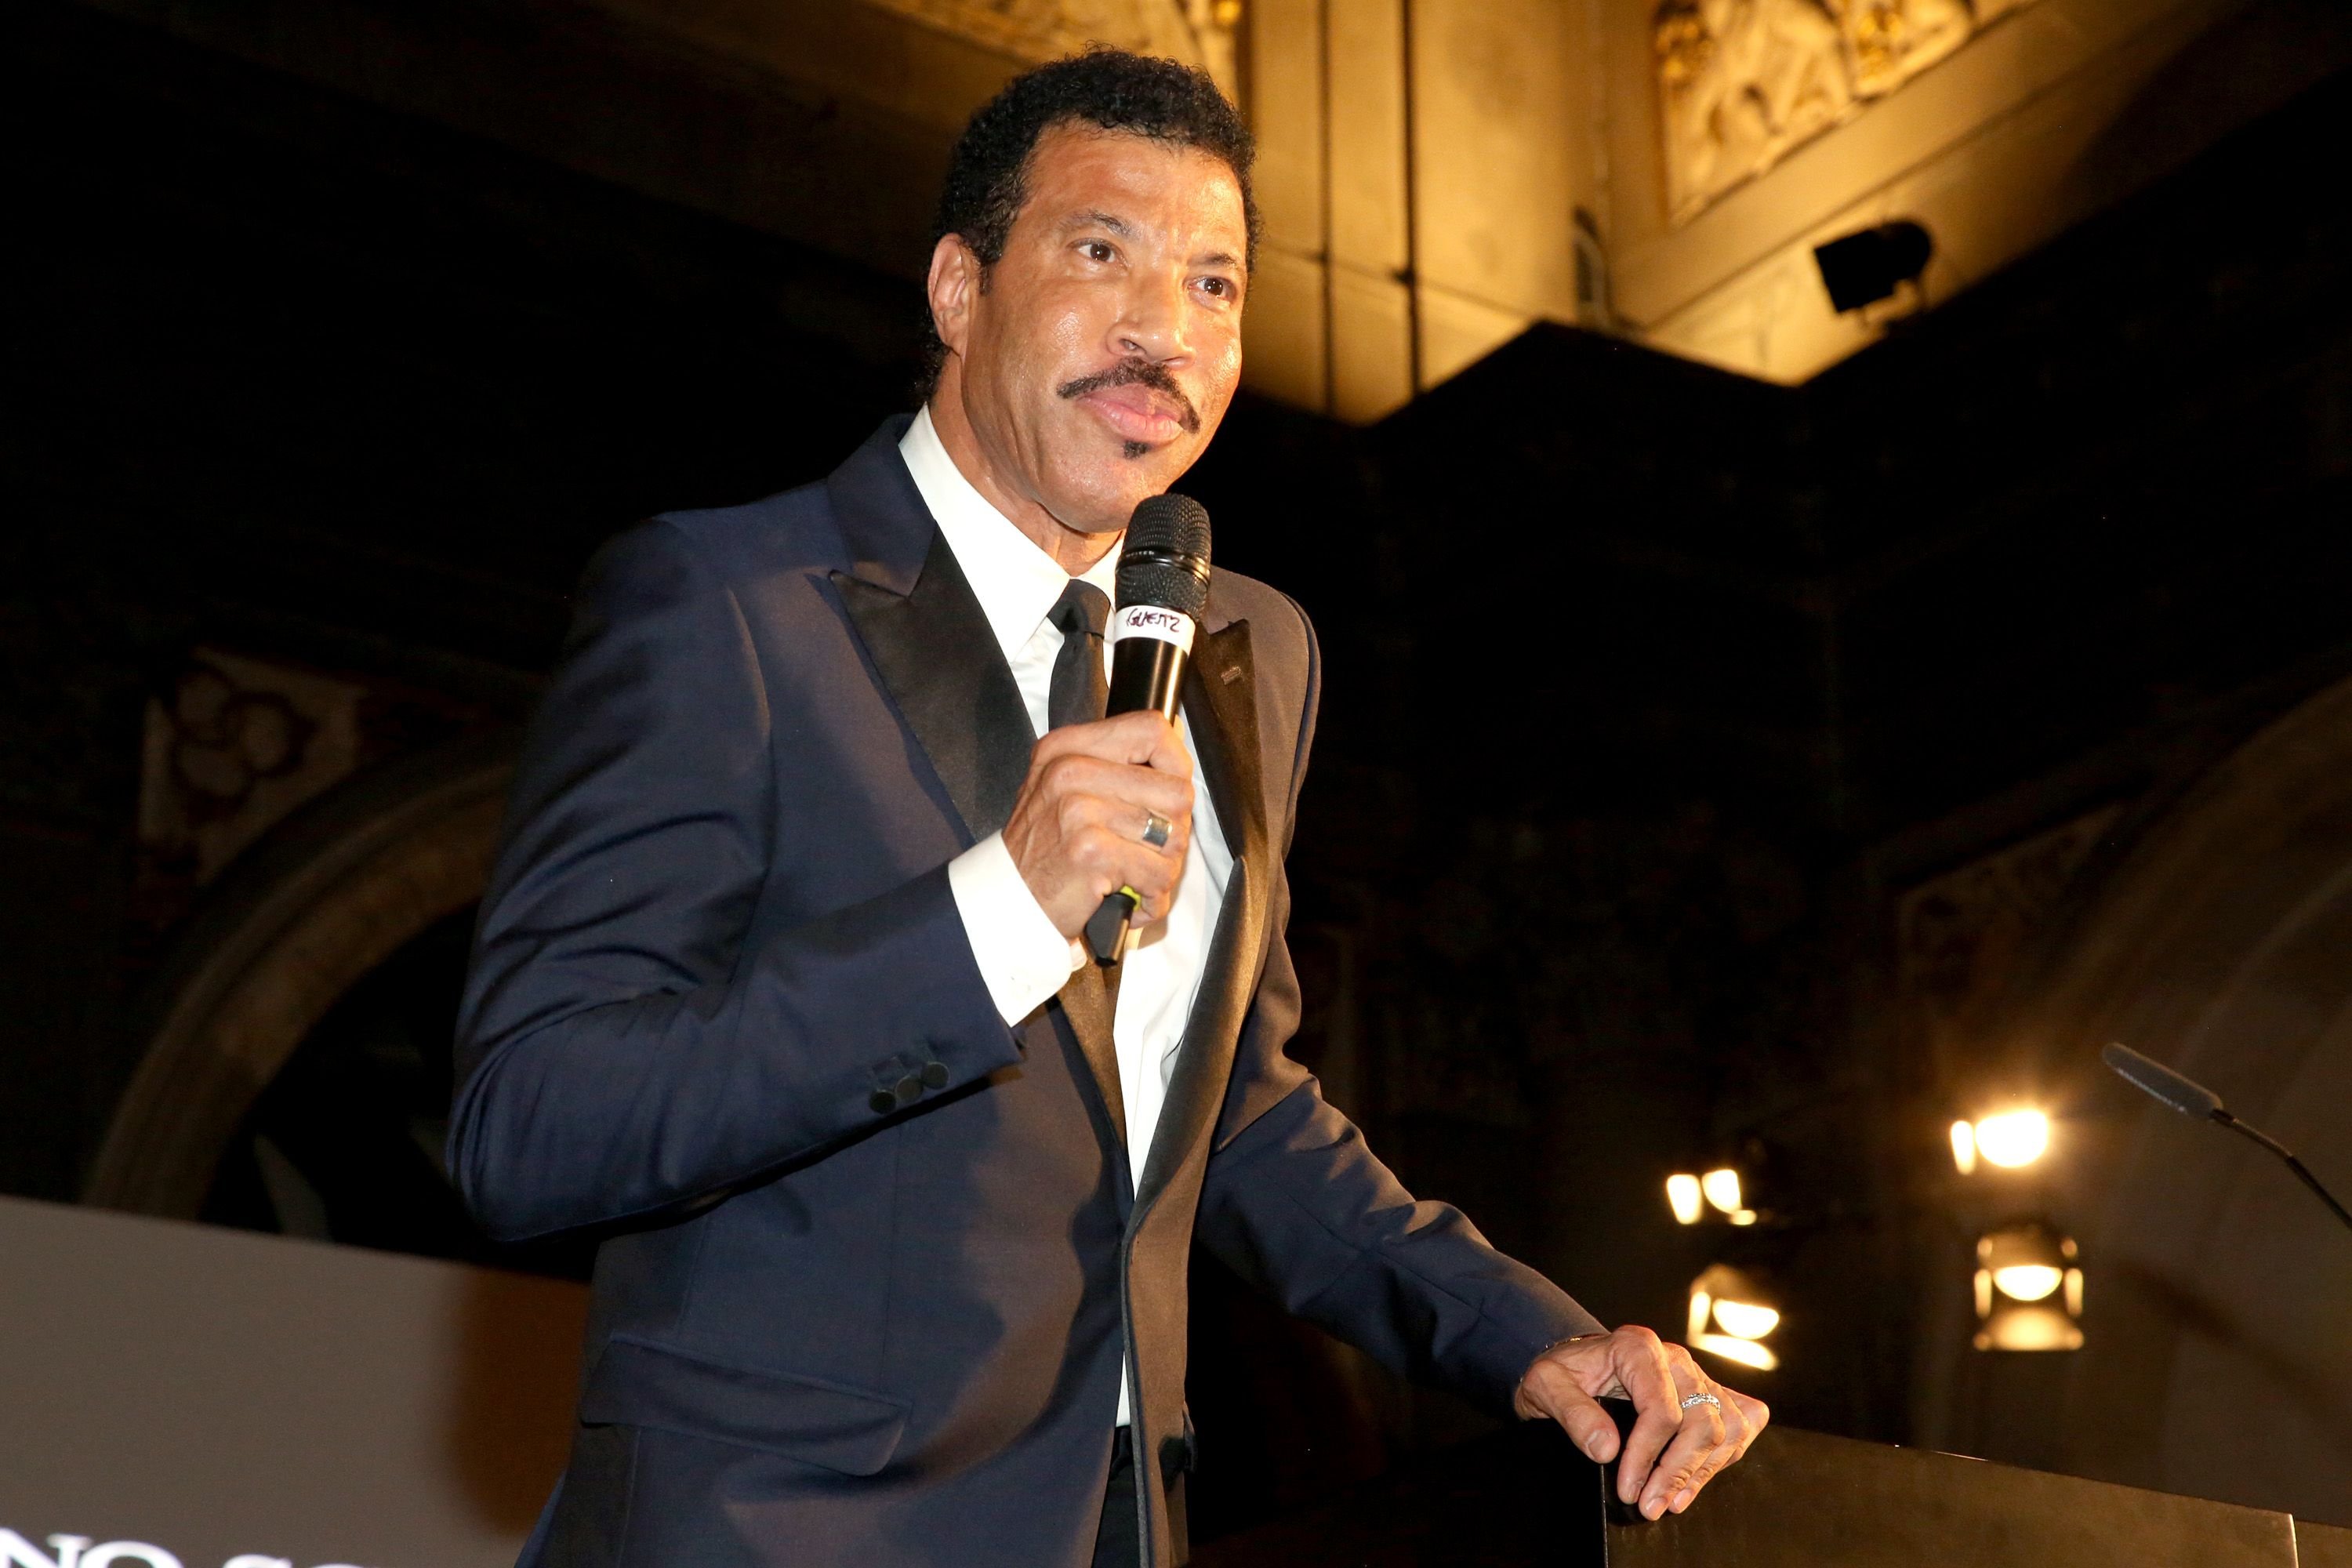 Lionel Richie during the Celebrity Fight Night gala celebrating Celebrity Fight Night on September 7, 2014, in Florence, Italy | Photo: Rachel Murray/Getty Images